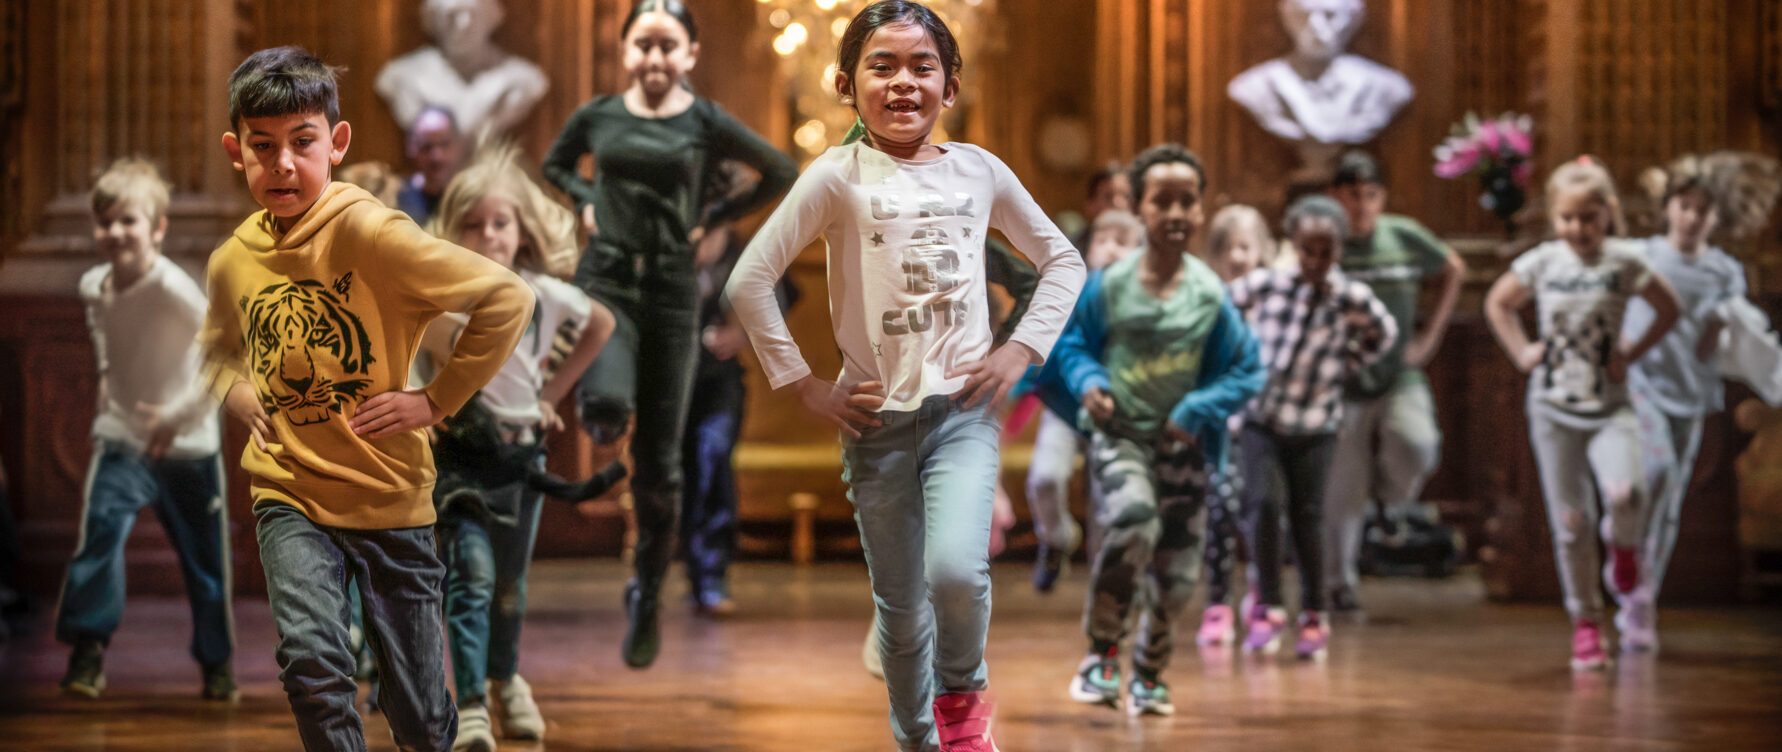 Students from Smedshags School discover The Magical House with Young at the Opera, Royal Swedish Opera. Photographer: Markus Gårder